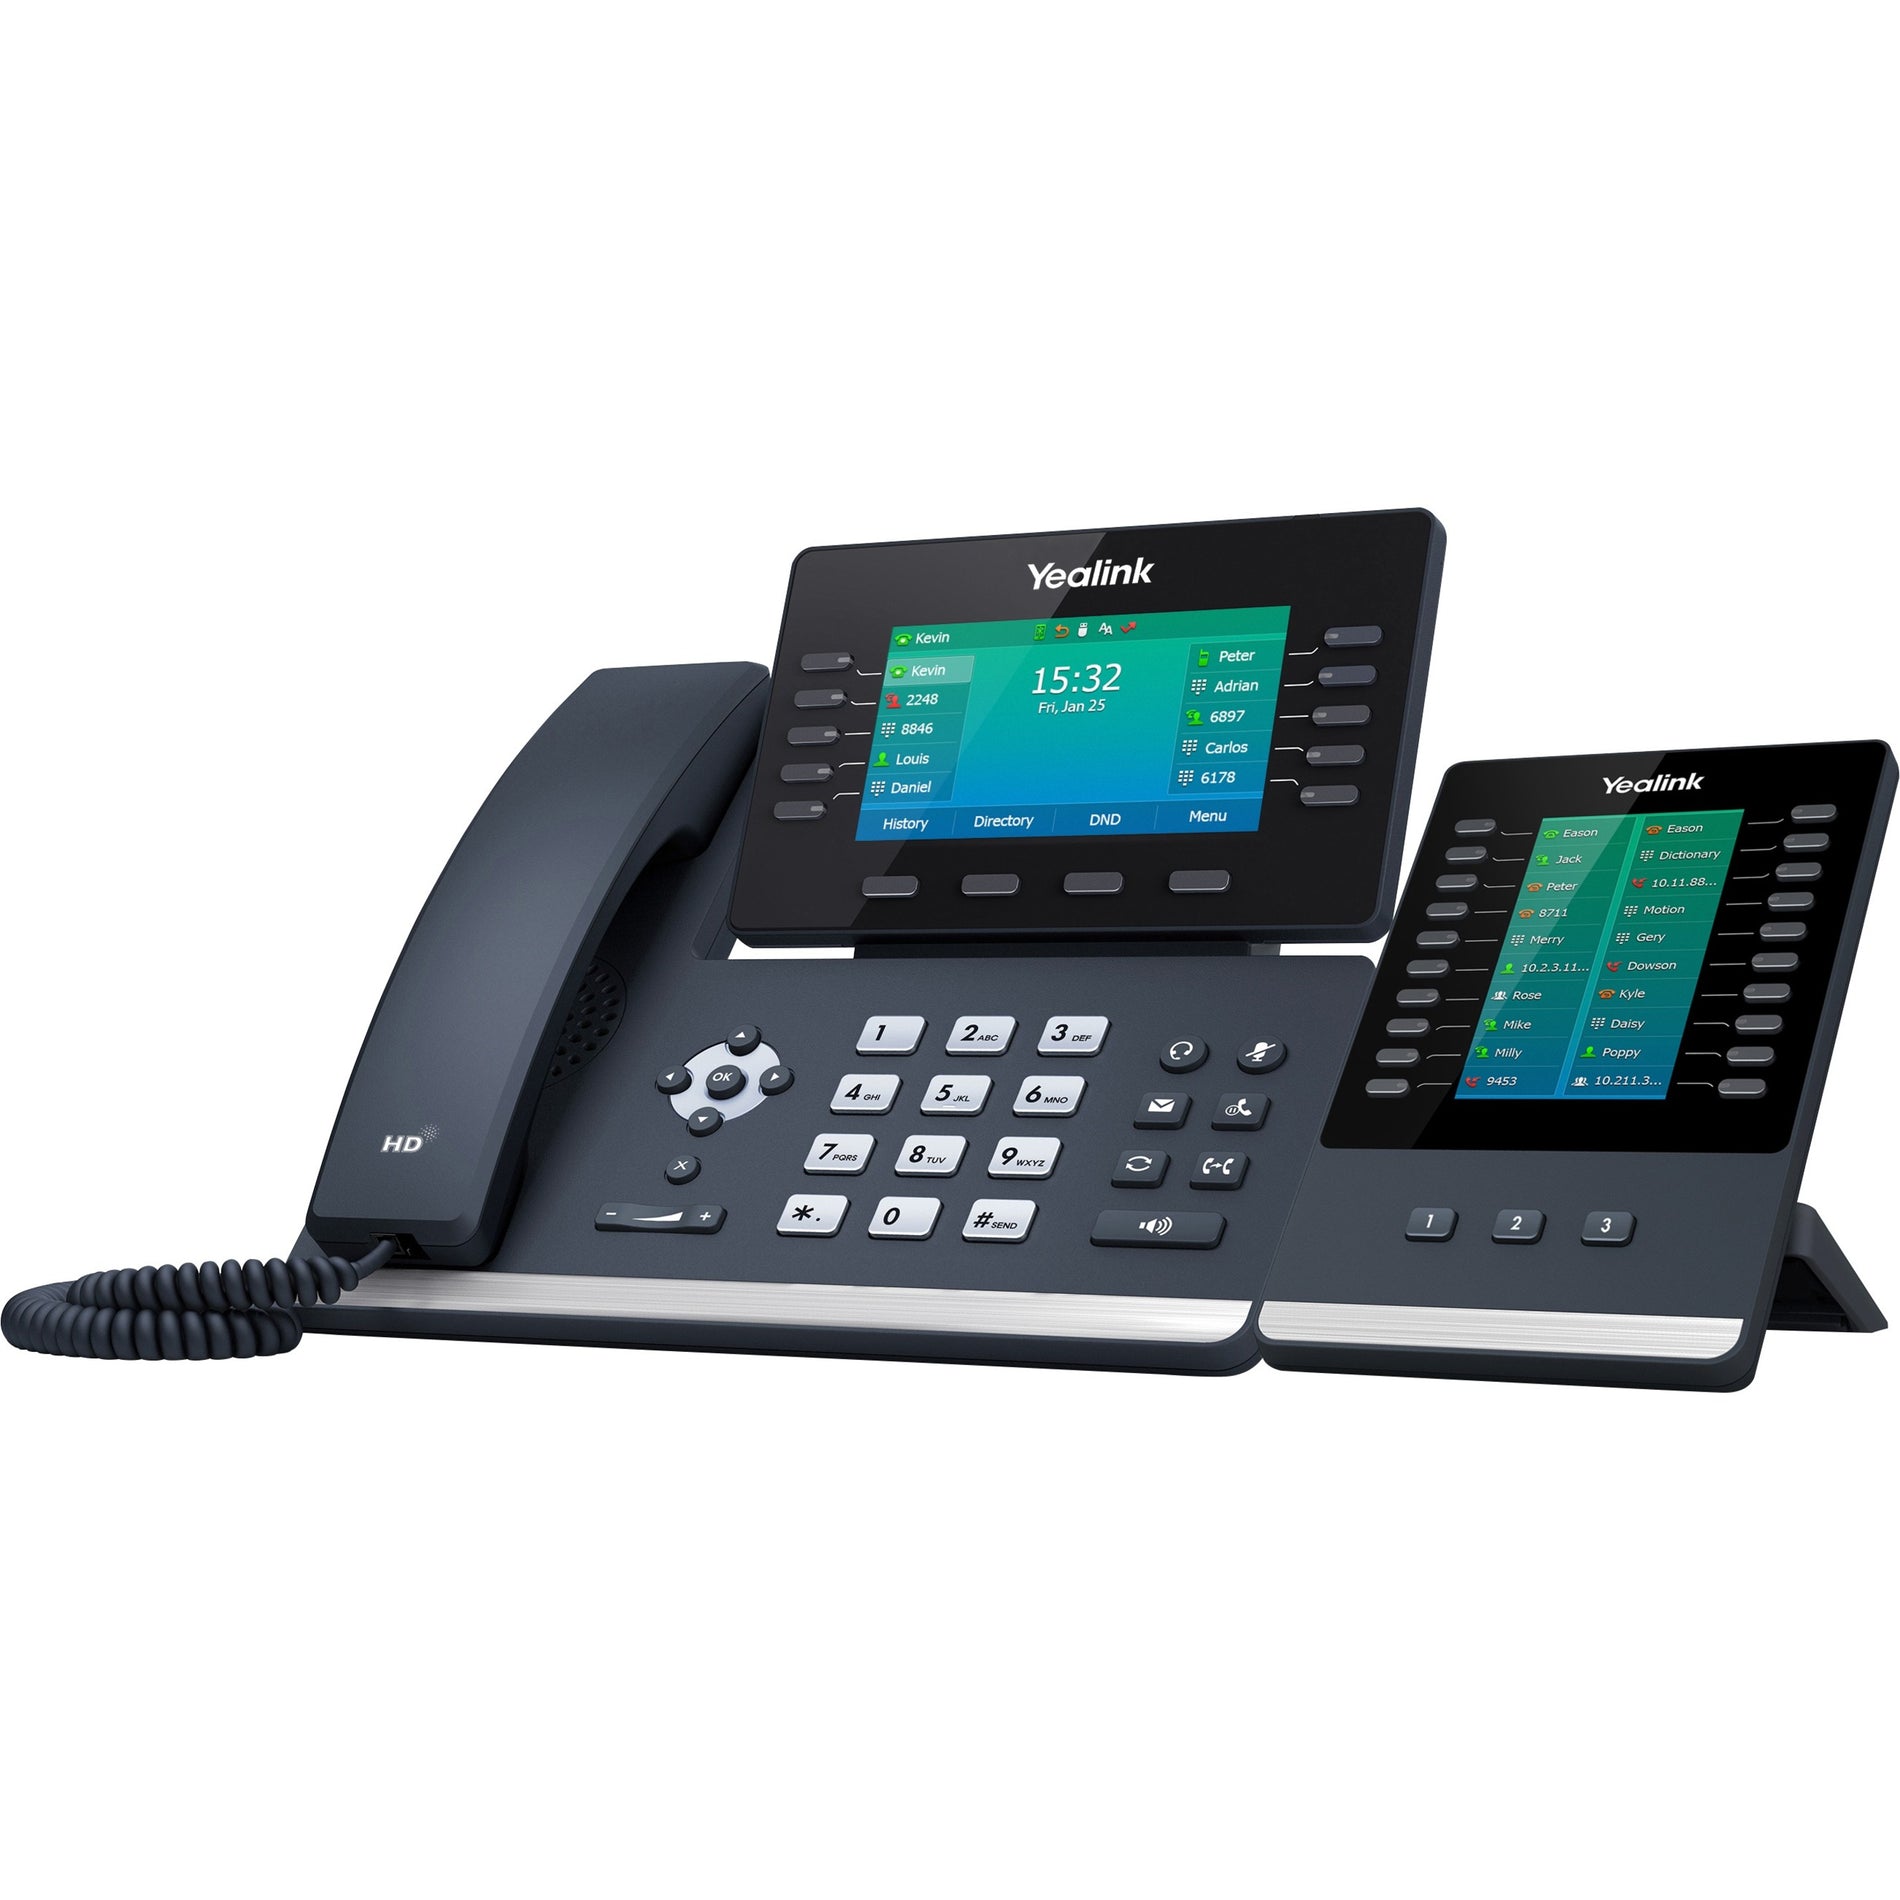 Yealink SIP-T54W Prime Business Phone with 4.4in. Color LCD Screen, Bluetooth 4.2